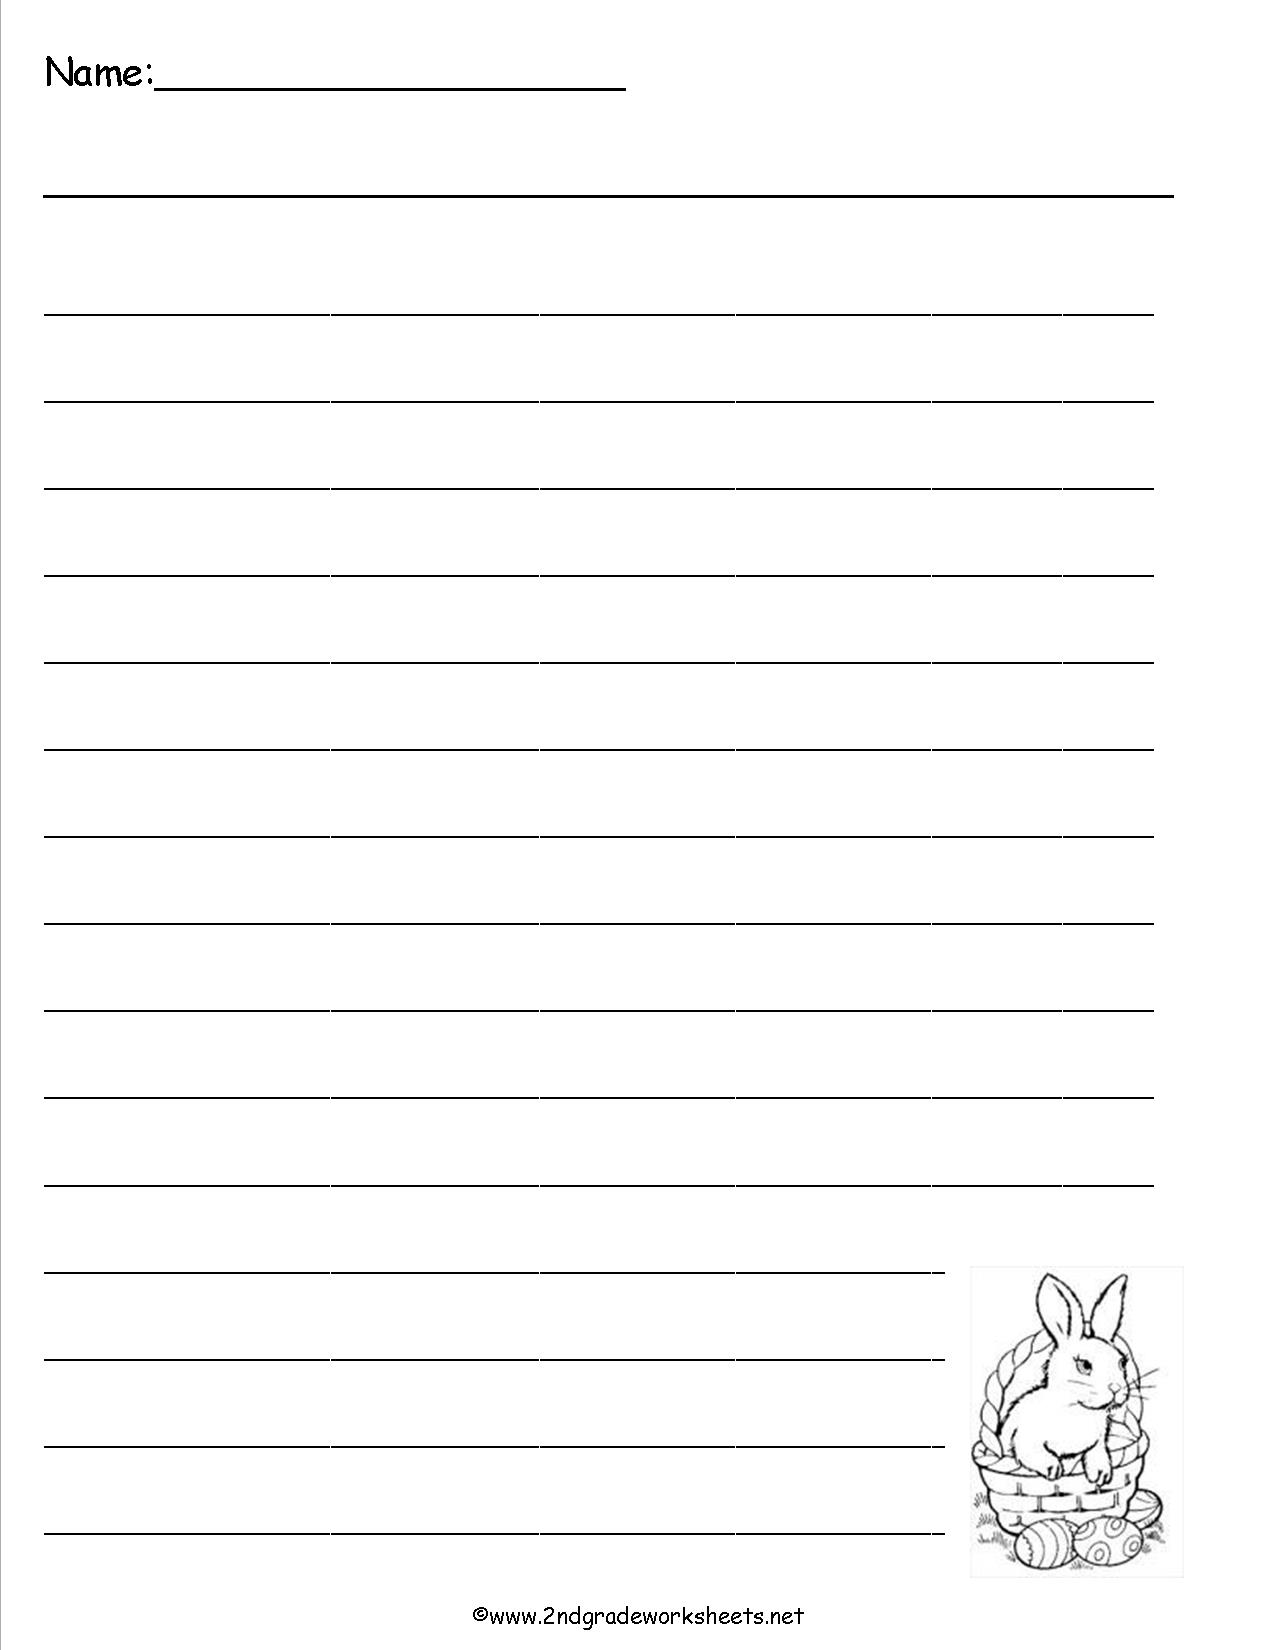 10-best-images-of-worksheets-easter-bunny-free-printable-easter